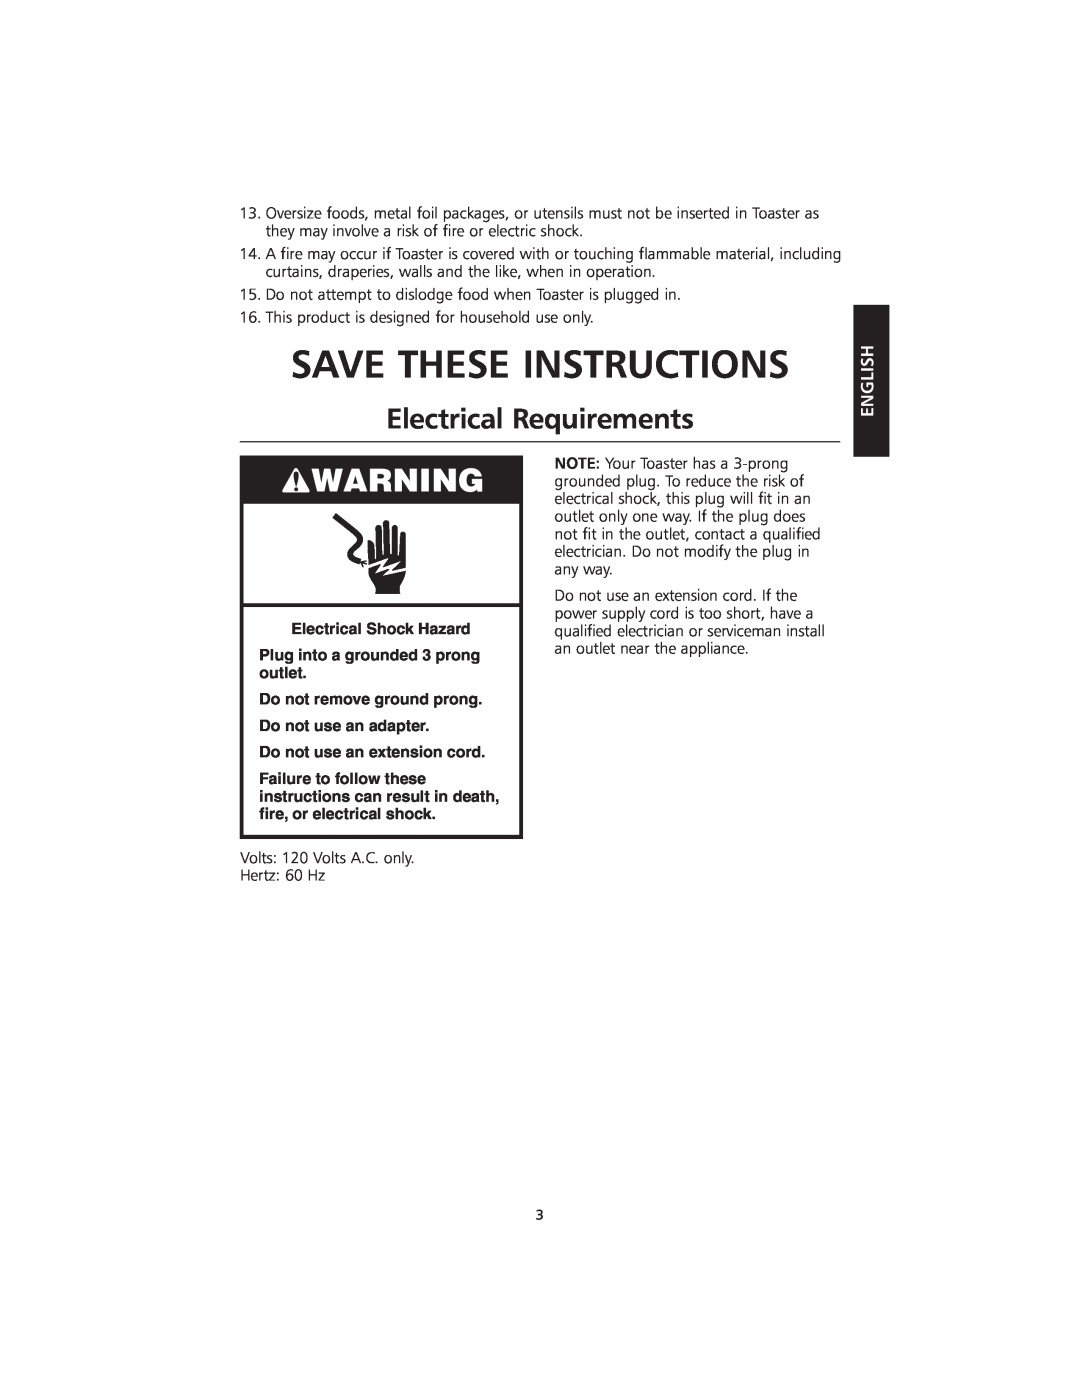 KitchenAid KMTT200 Save These Instructions, Electrical Requirements, Do not remove ground prong Do not use an adapter 